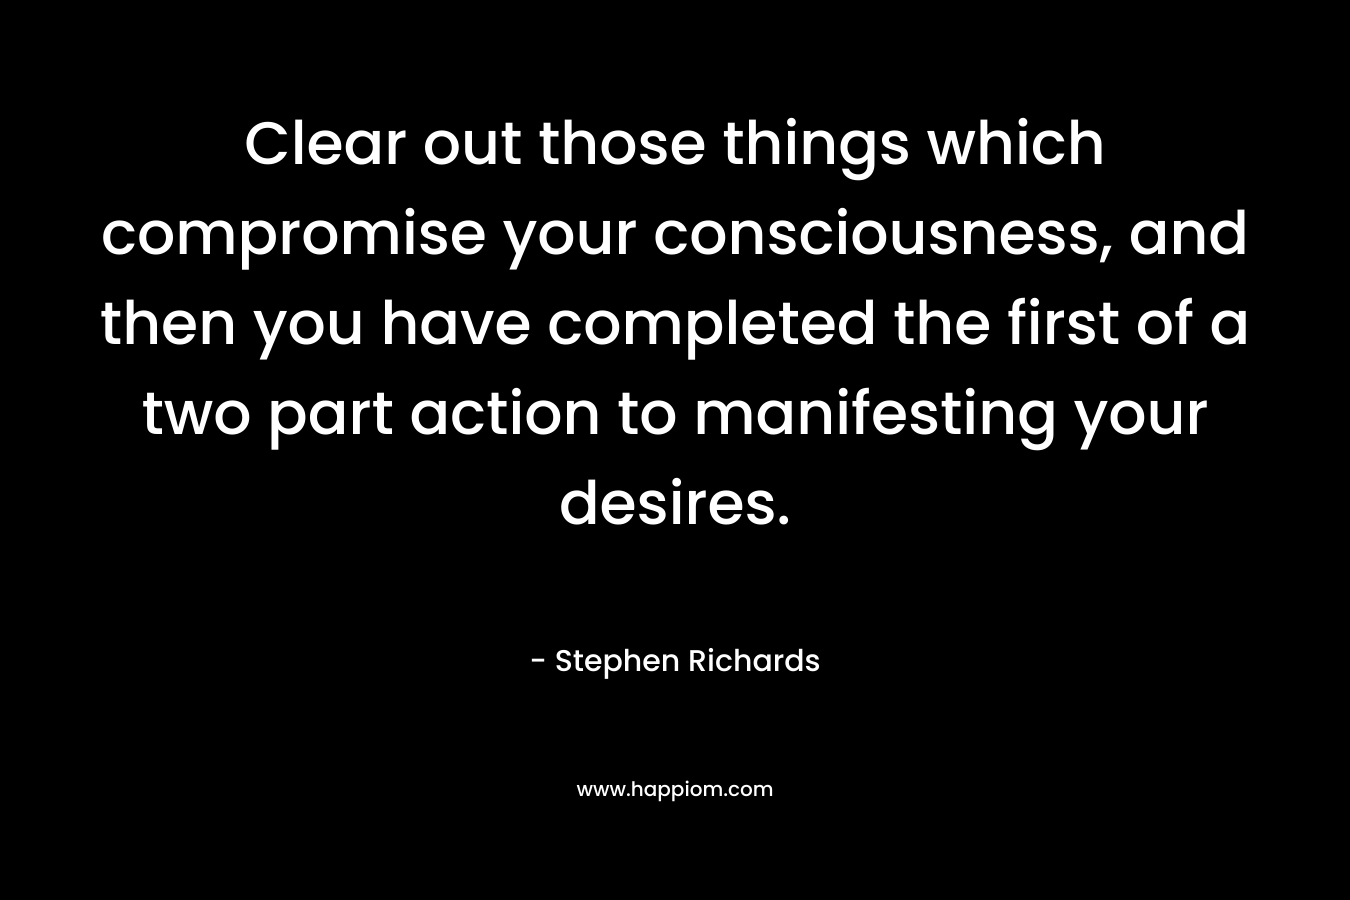 Clear out those things which compromise your consciousness, and then you have completed the first of a two part action to manifesting your desires. – Stephen Richards